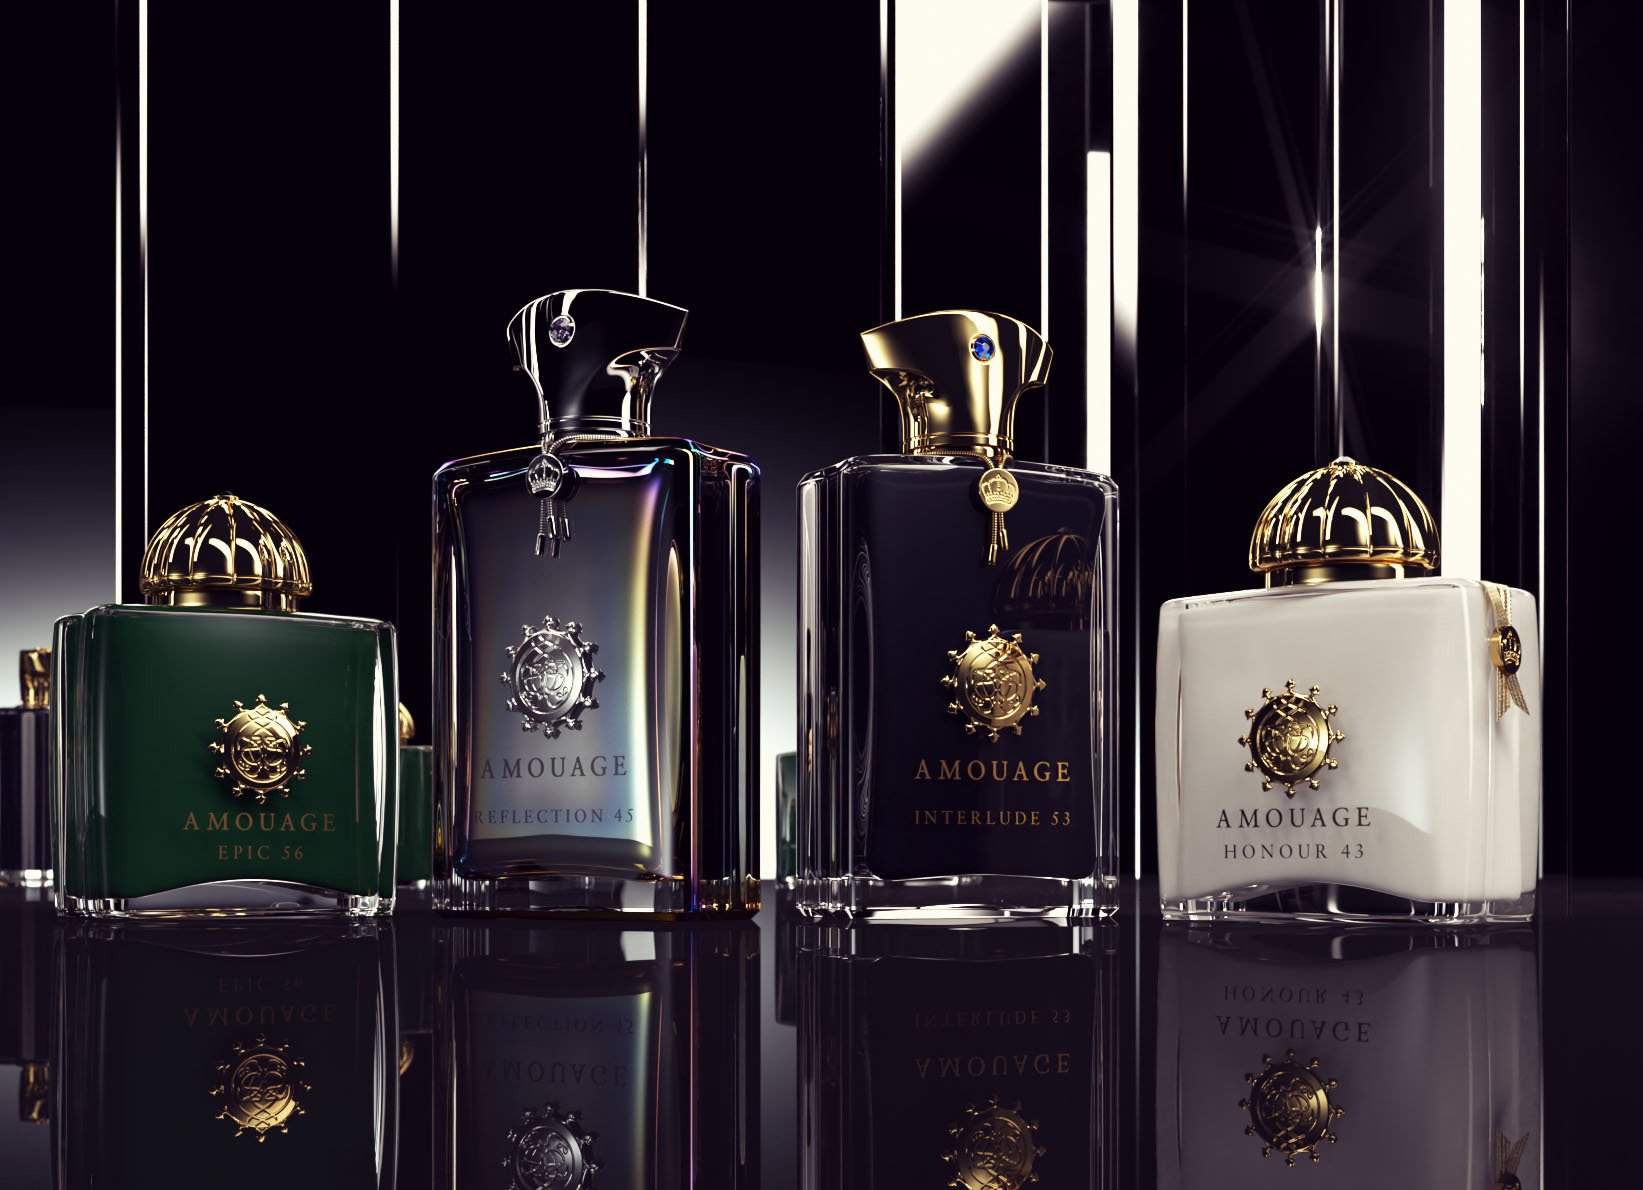 Introducing Amouage's Exceptional Extraits